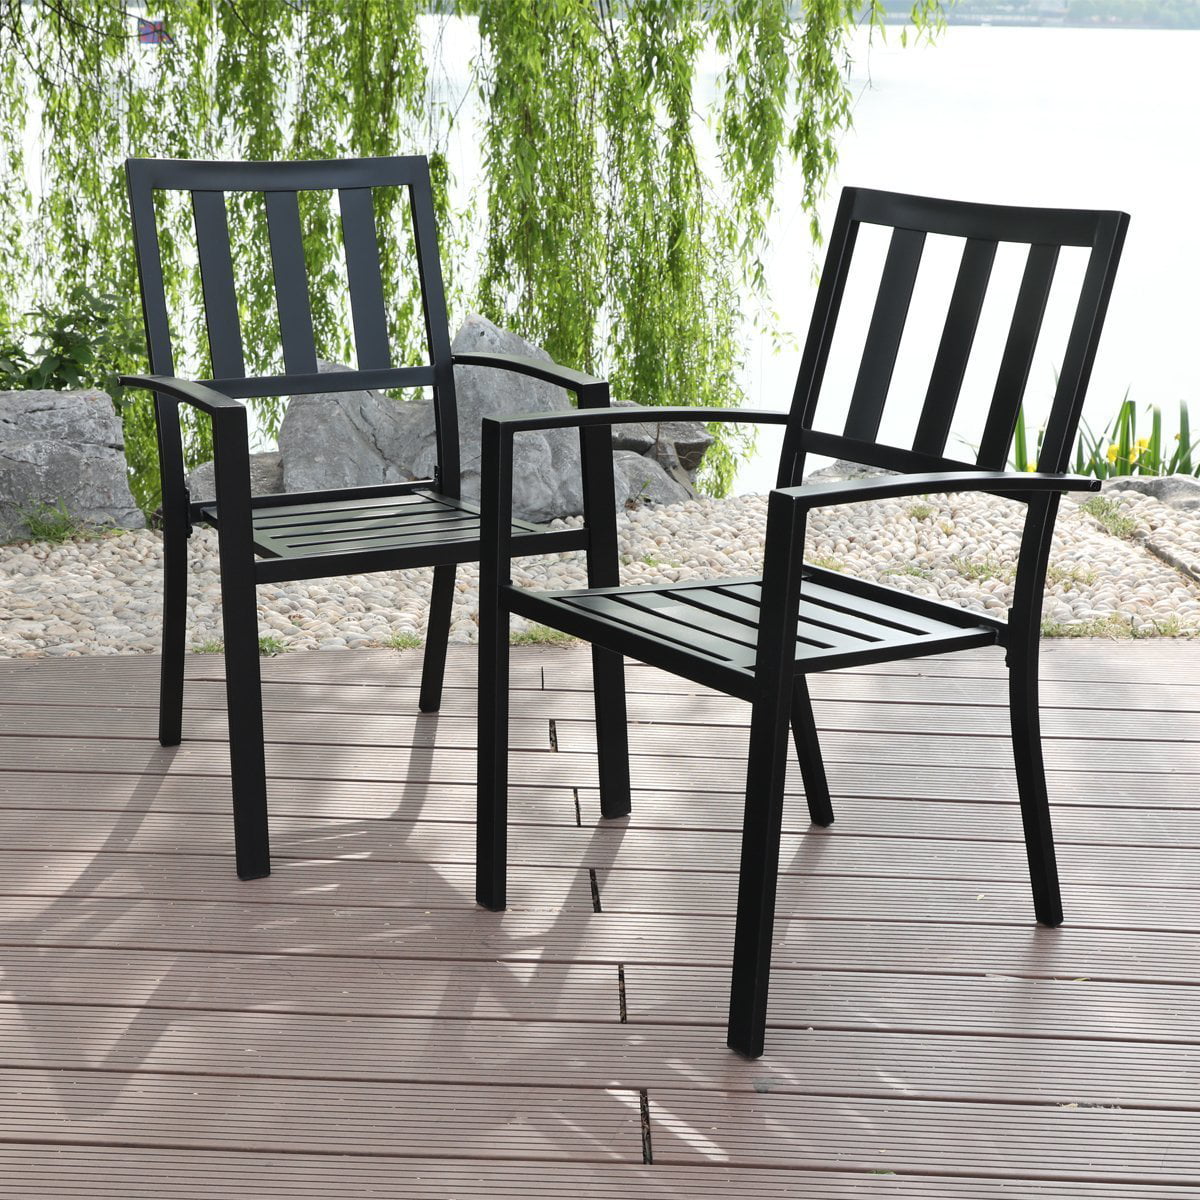 PHI VILLA Metal Patio Outdoor Dining Chairs Set of 2 Stackable Bistro Deck Chairs for Garden Backyard Lawn Support 300LB Black 